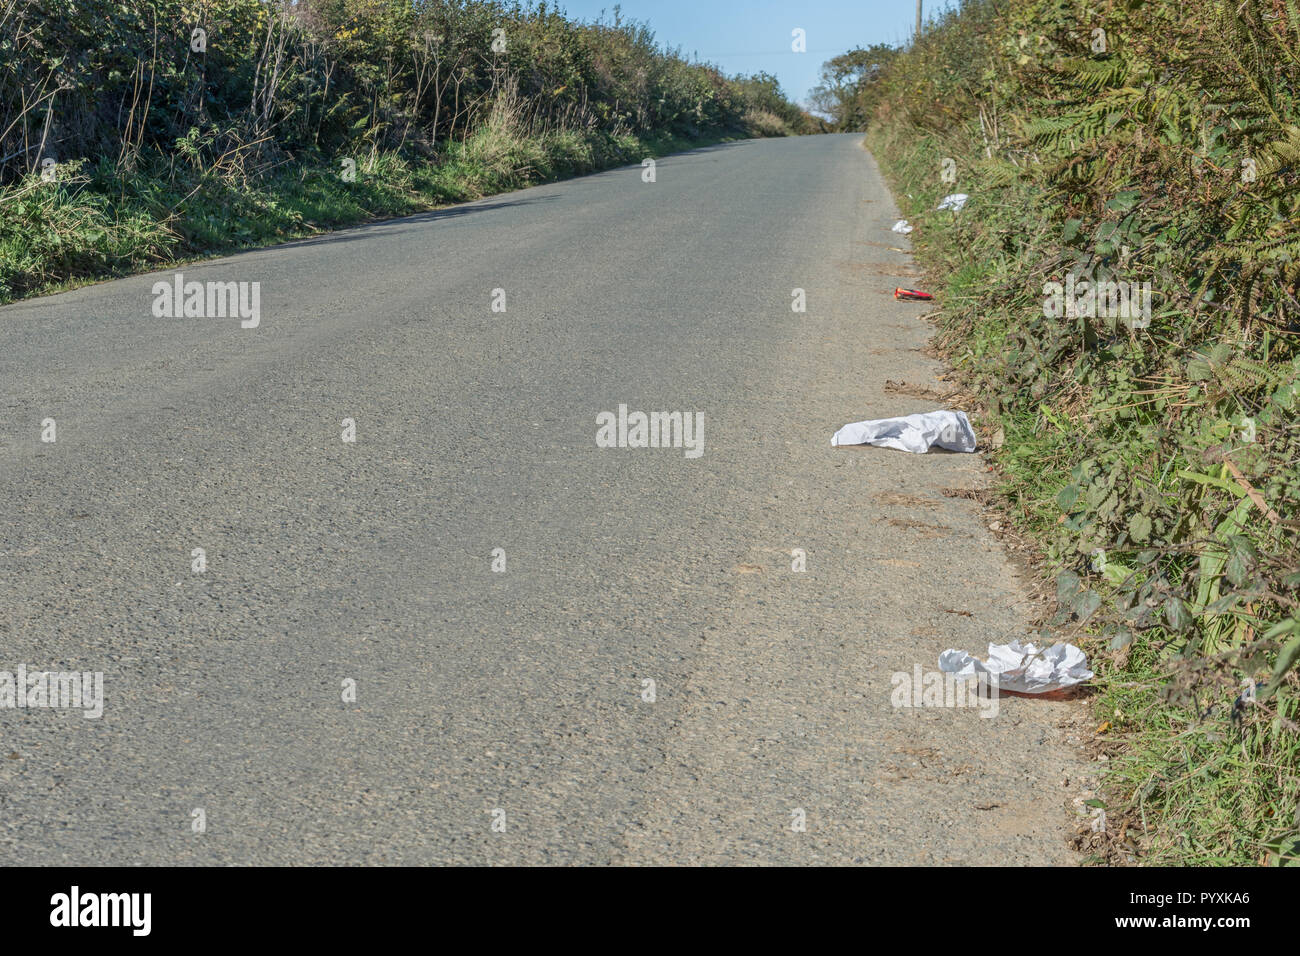 Stretch of litter-strewn country lane. Concept roadside litter UK. Keep Britain tidy, plastic waste in road. For Clean Up Britain campaign. Stock Photo